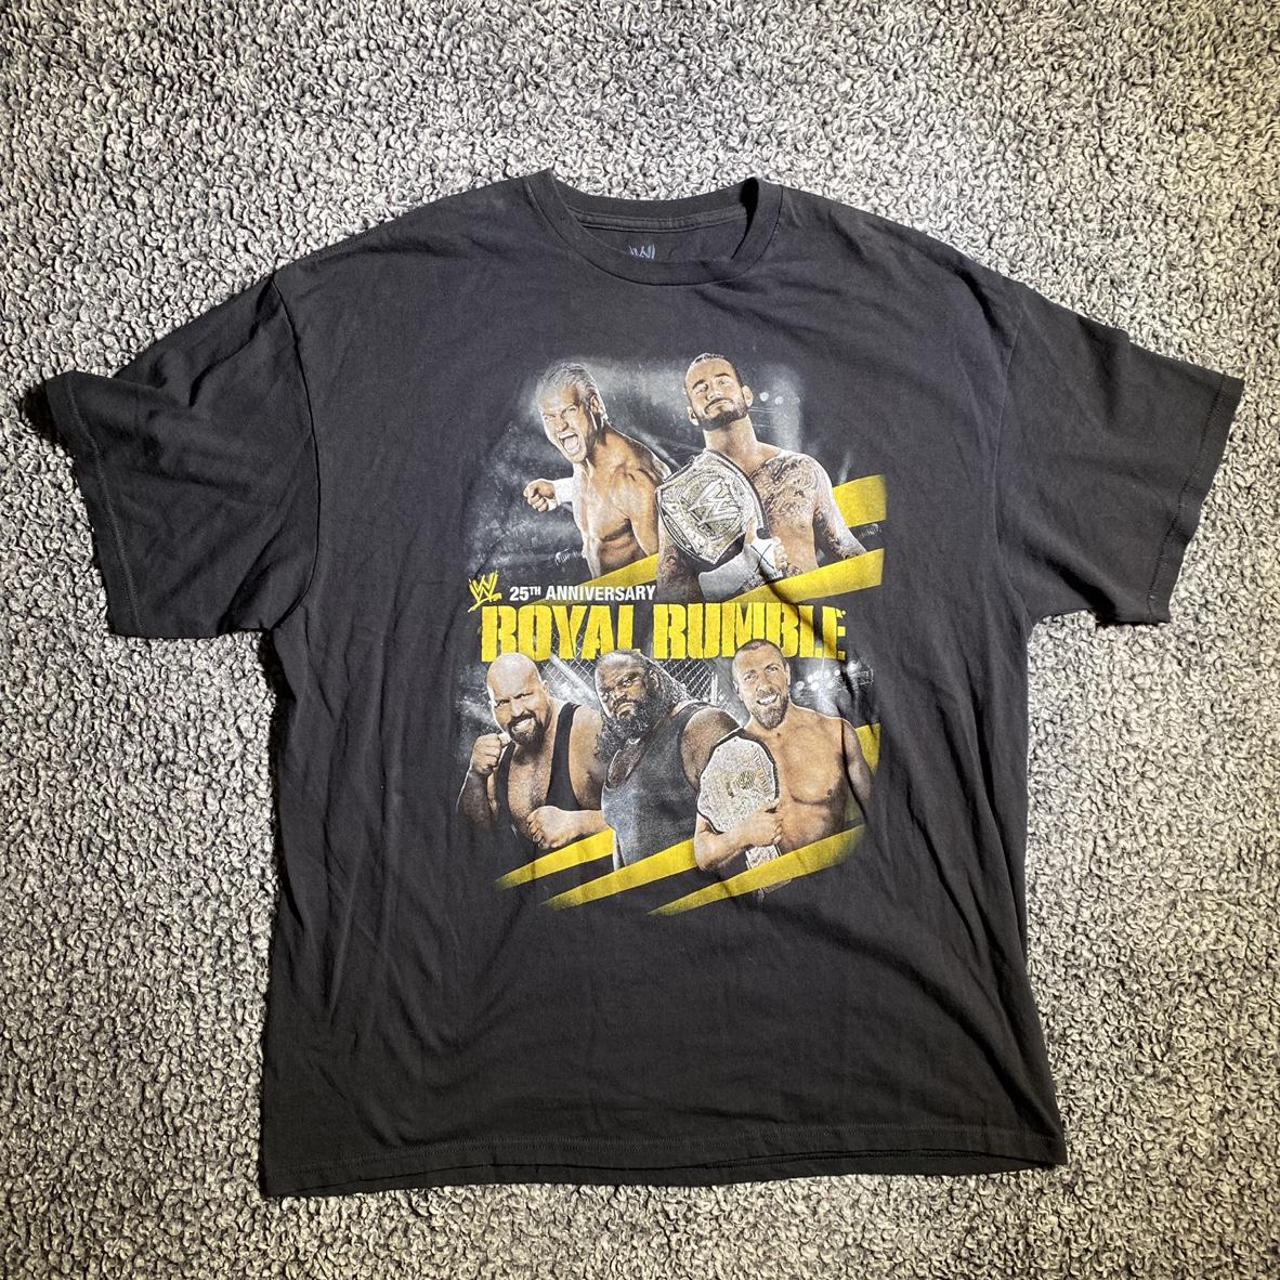 Product Image 1 - 25th anniversary royal rumble wrestling